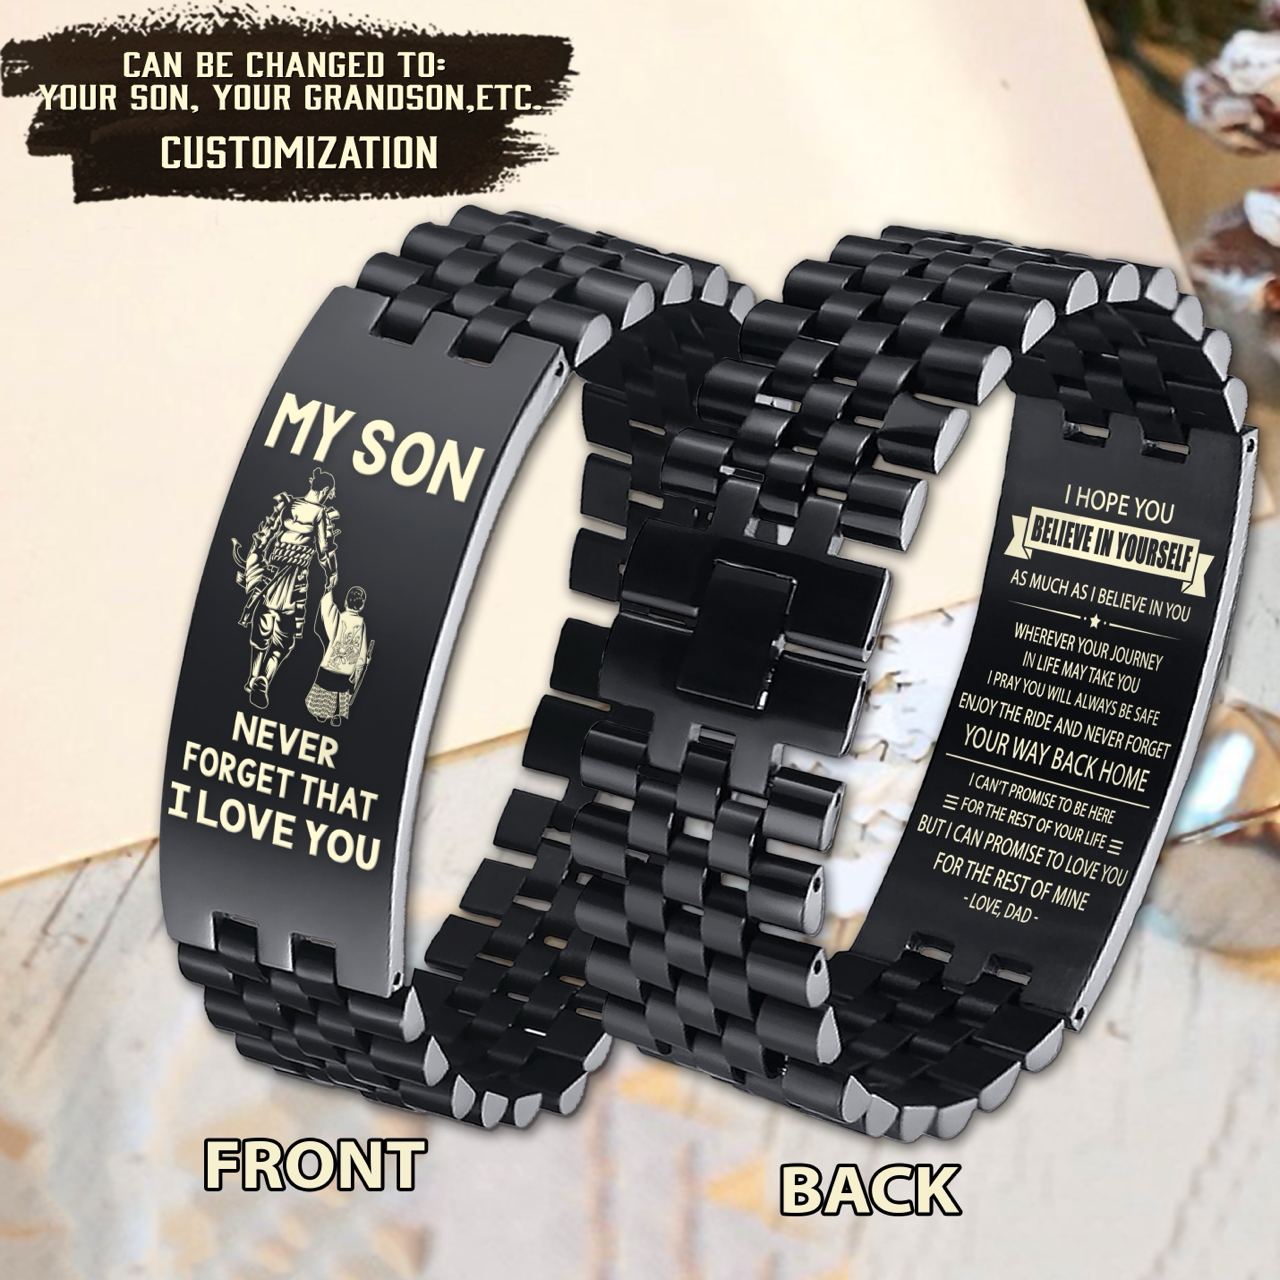 Samurai engraved bracelet, gifts from dad mom to son, I am the storm